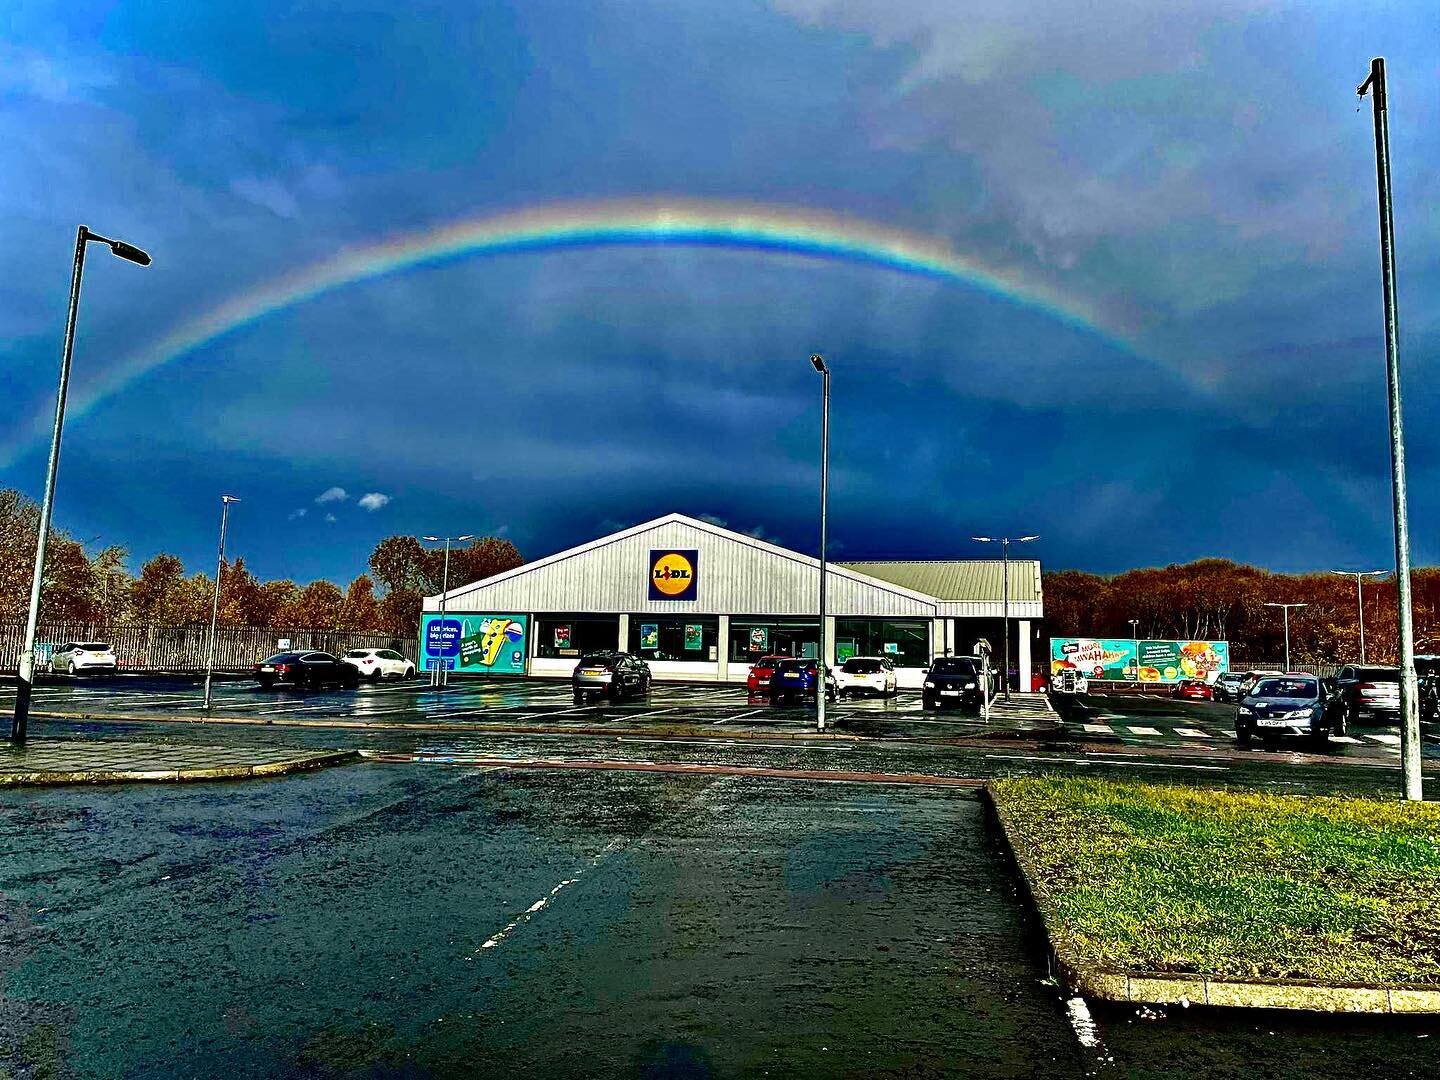 I call this piece &lsquo;Rainbow Over Lidl&rsquo;